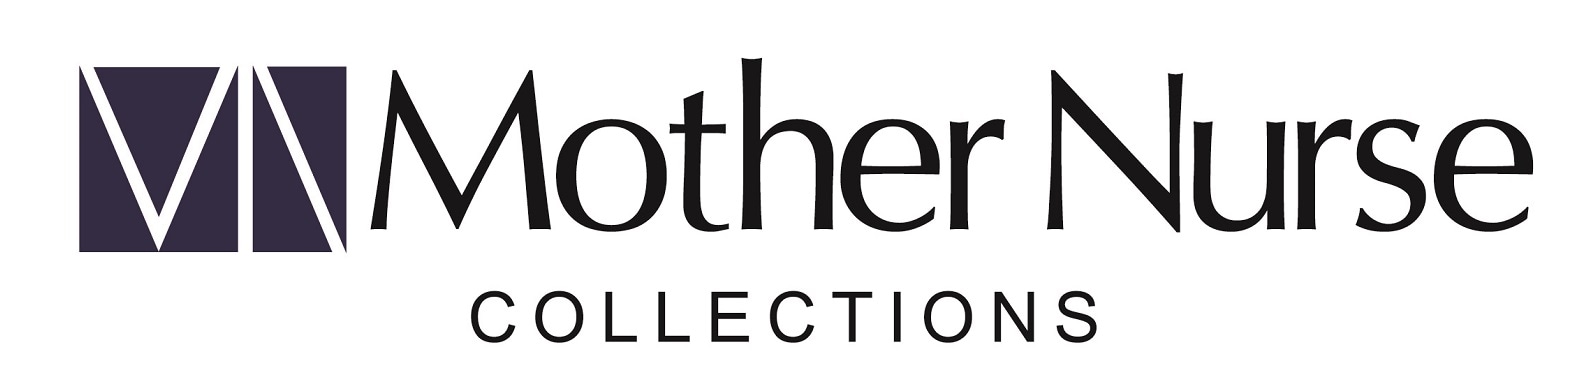 Mother Nurse Collections